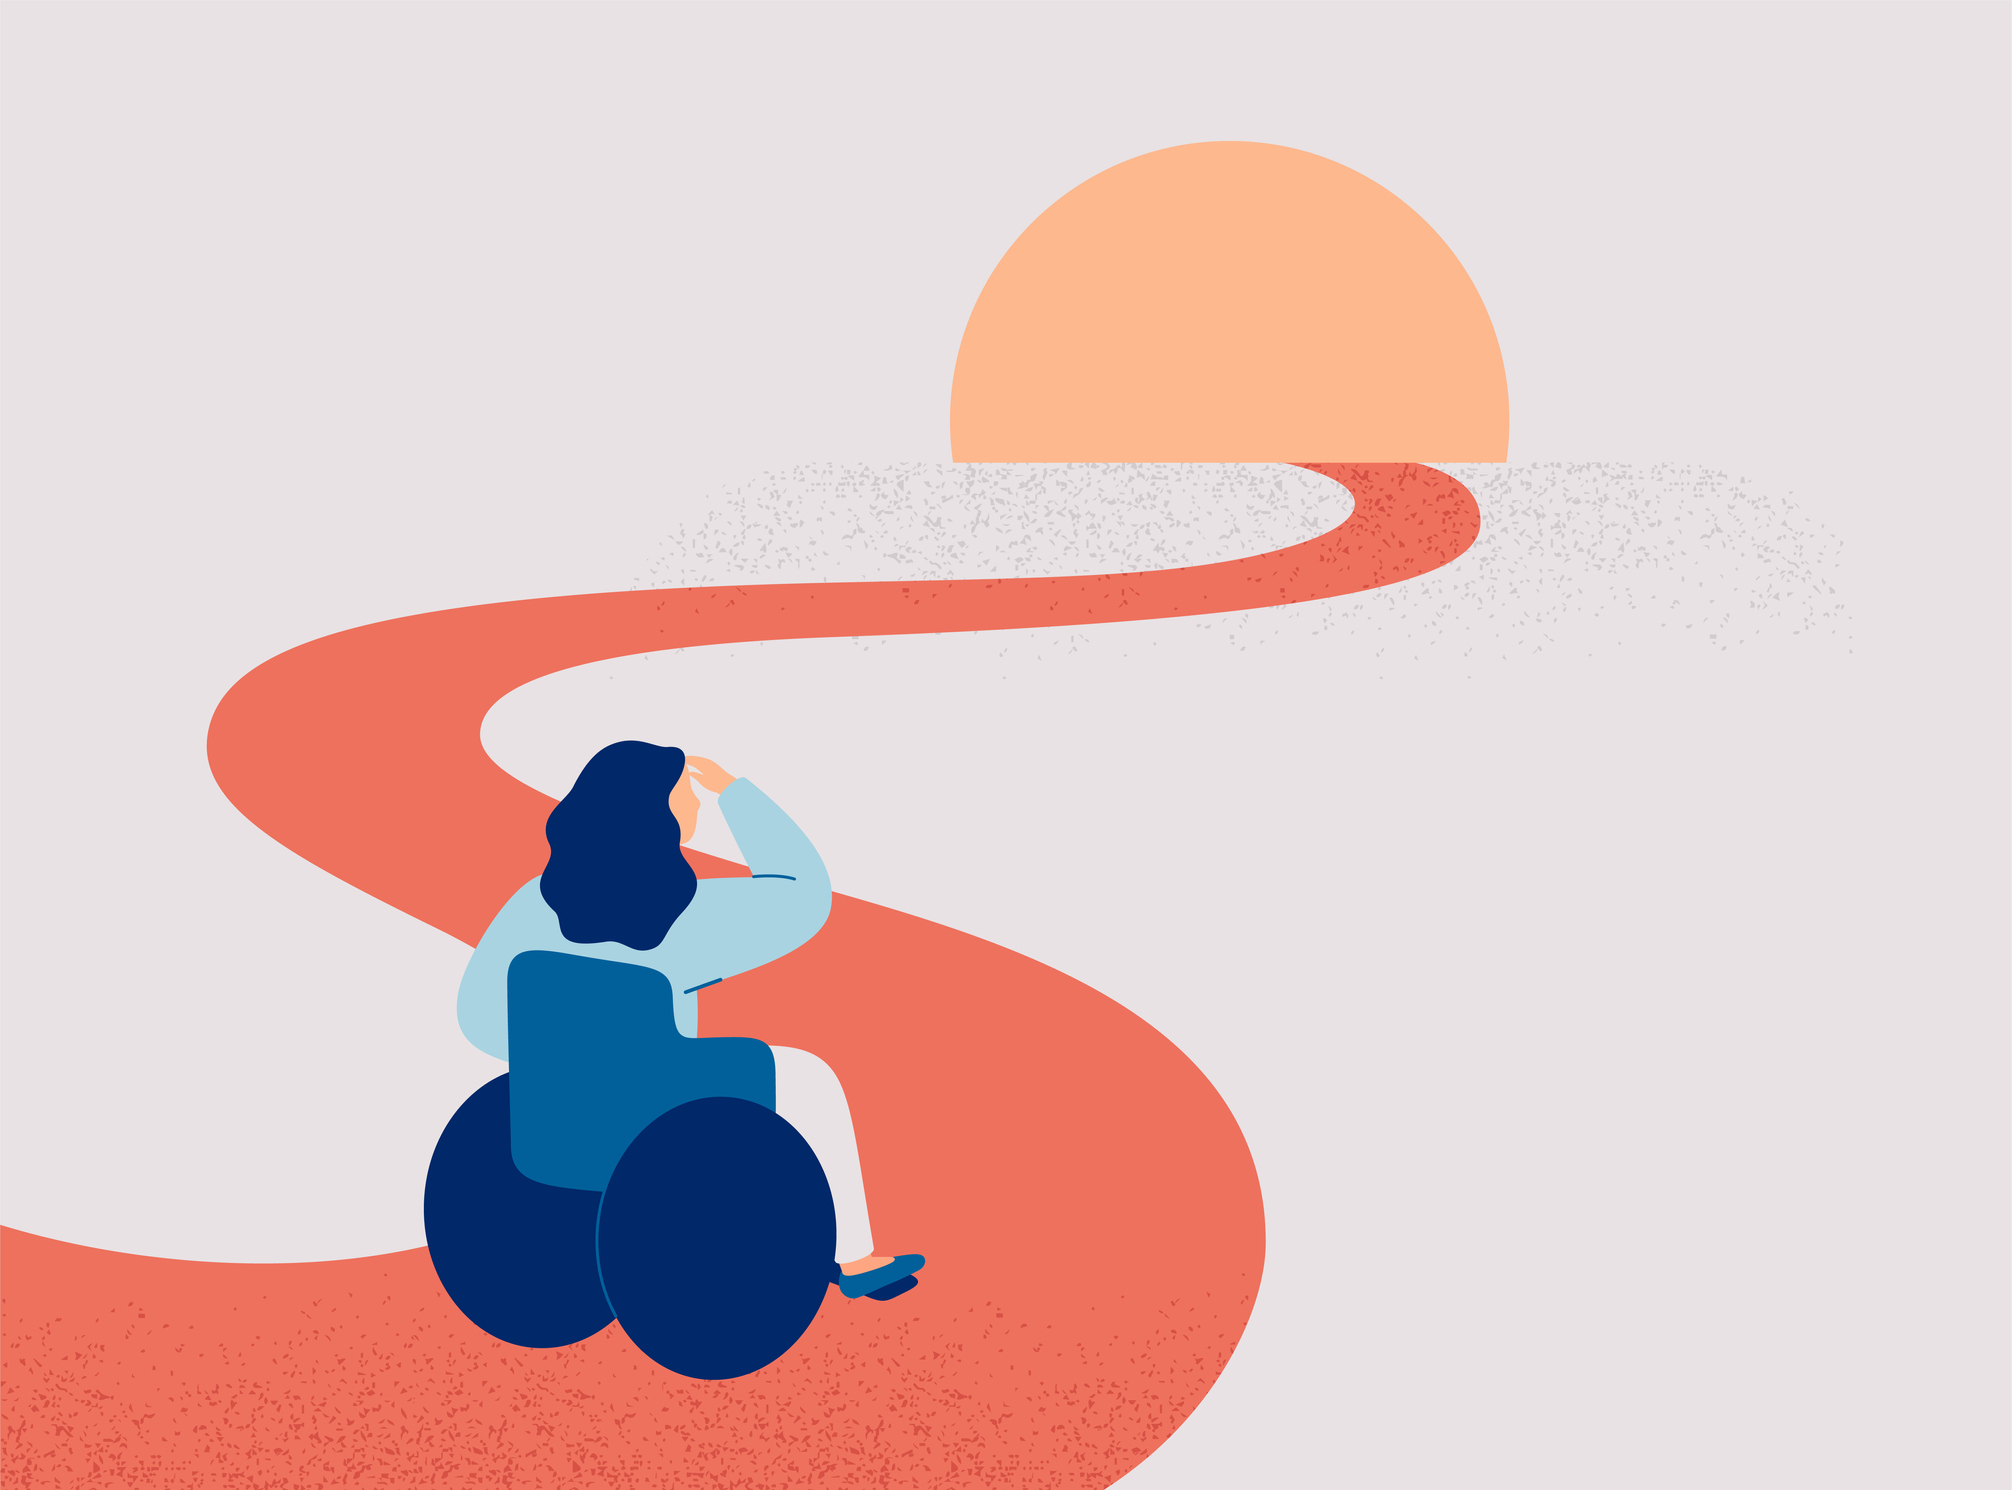 Woman sits in the wheelchair and looks on sunrise.
Girl with limited mobility looks into future  and searches opportunities for personal growth.